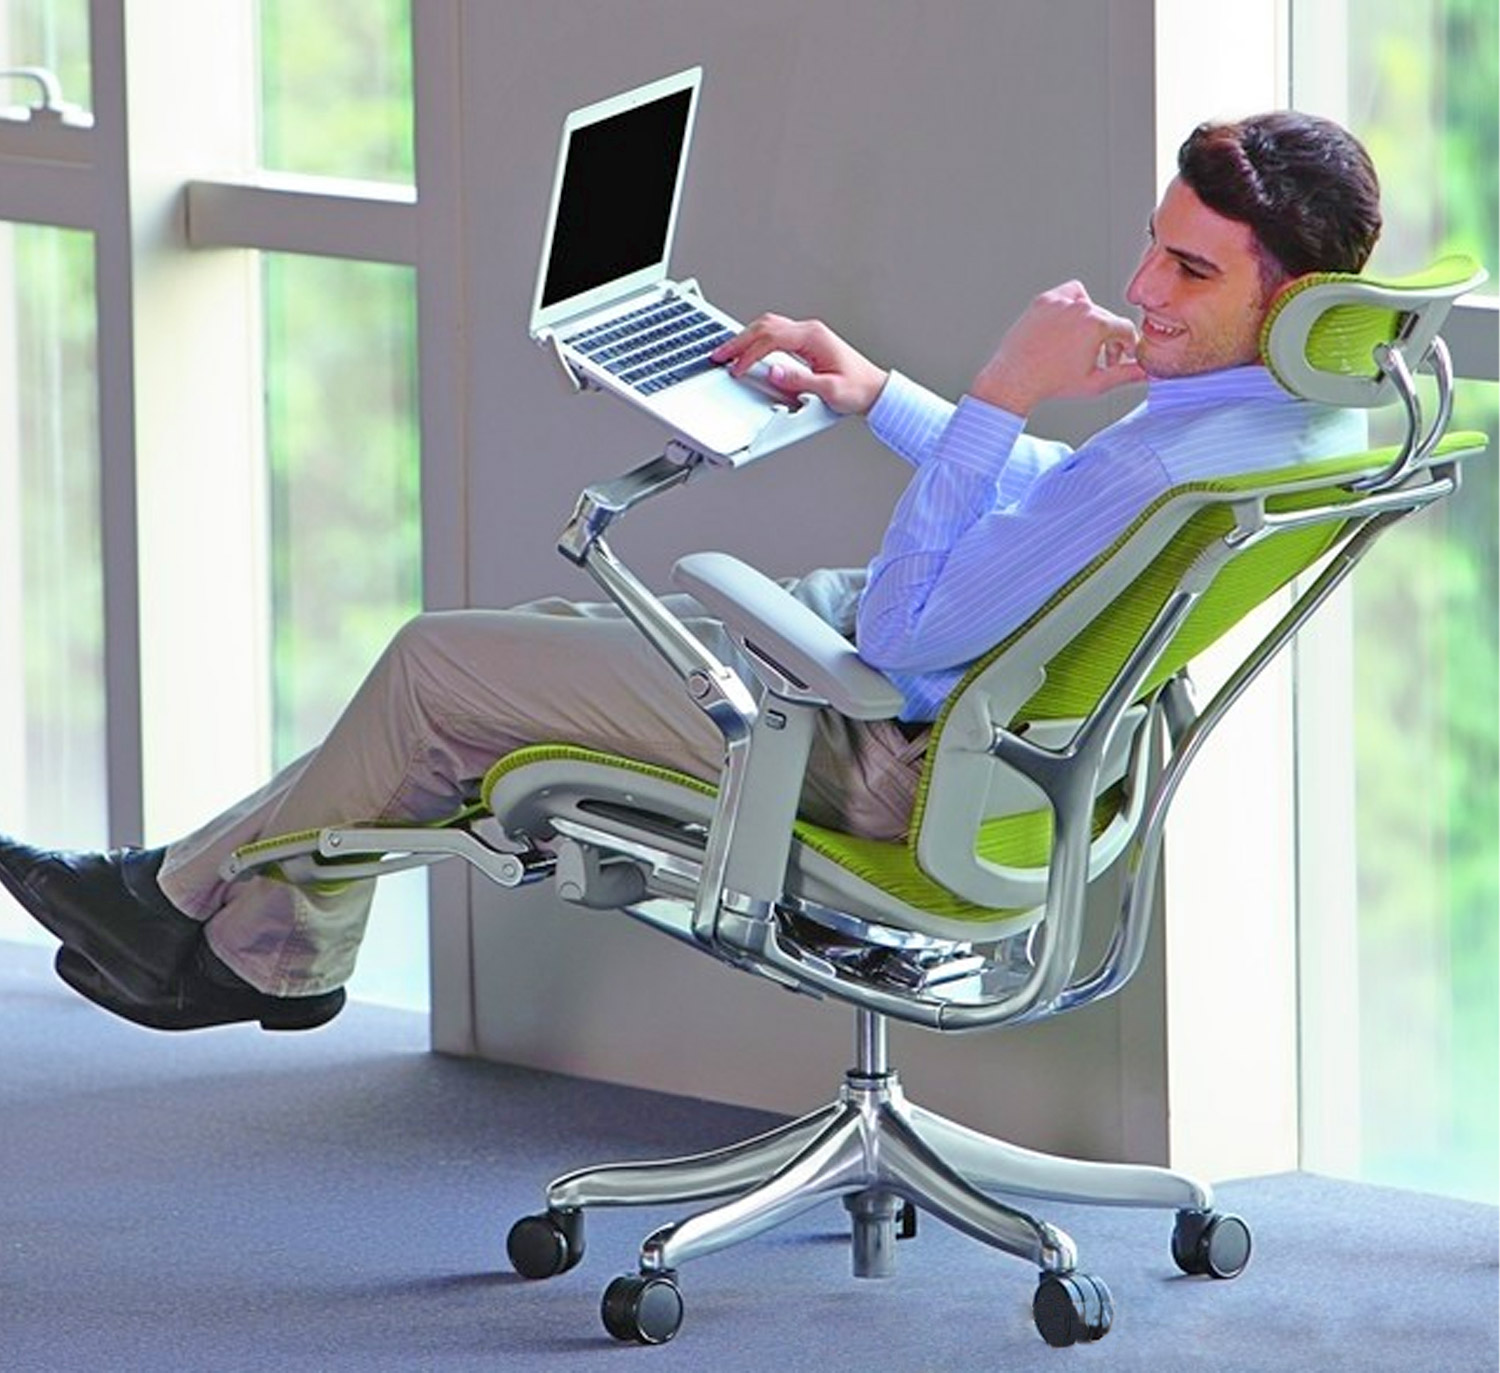 This Ultimate Office Chair Has A Laptop Mount Leg Rests And A Head Rest